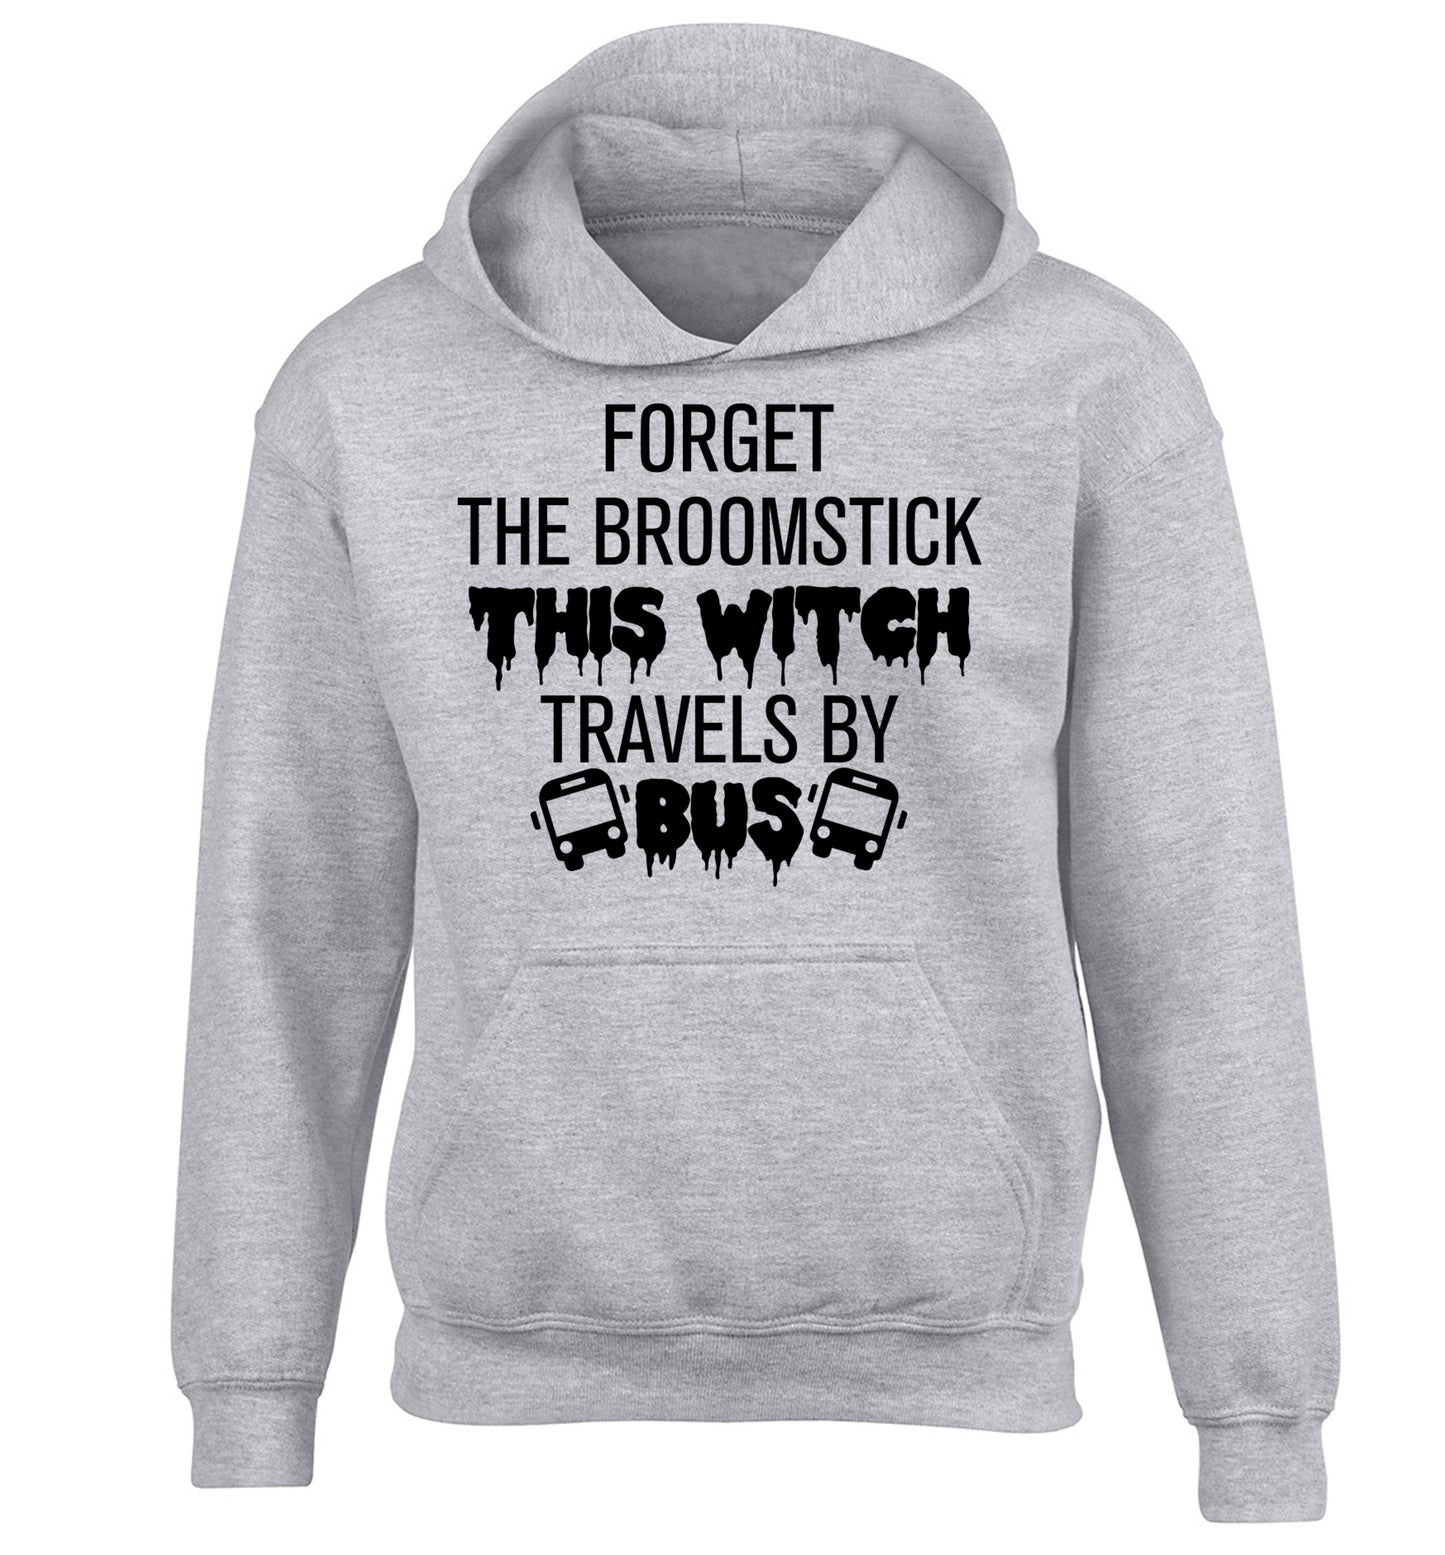 Forget the broomstick this witch travels by bus children's grey hoodie 12-14 Years